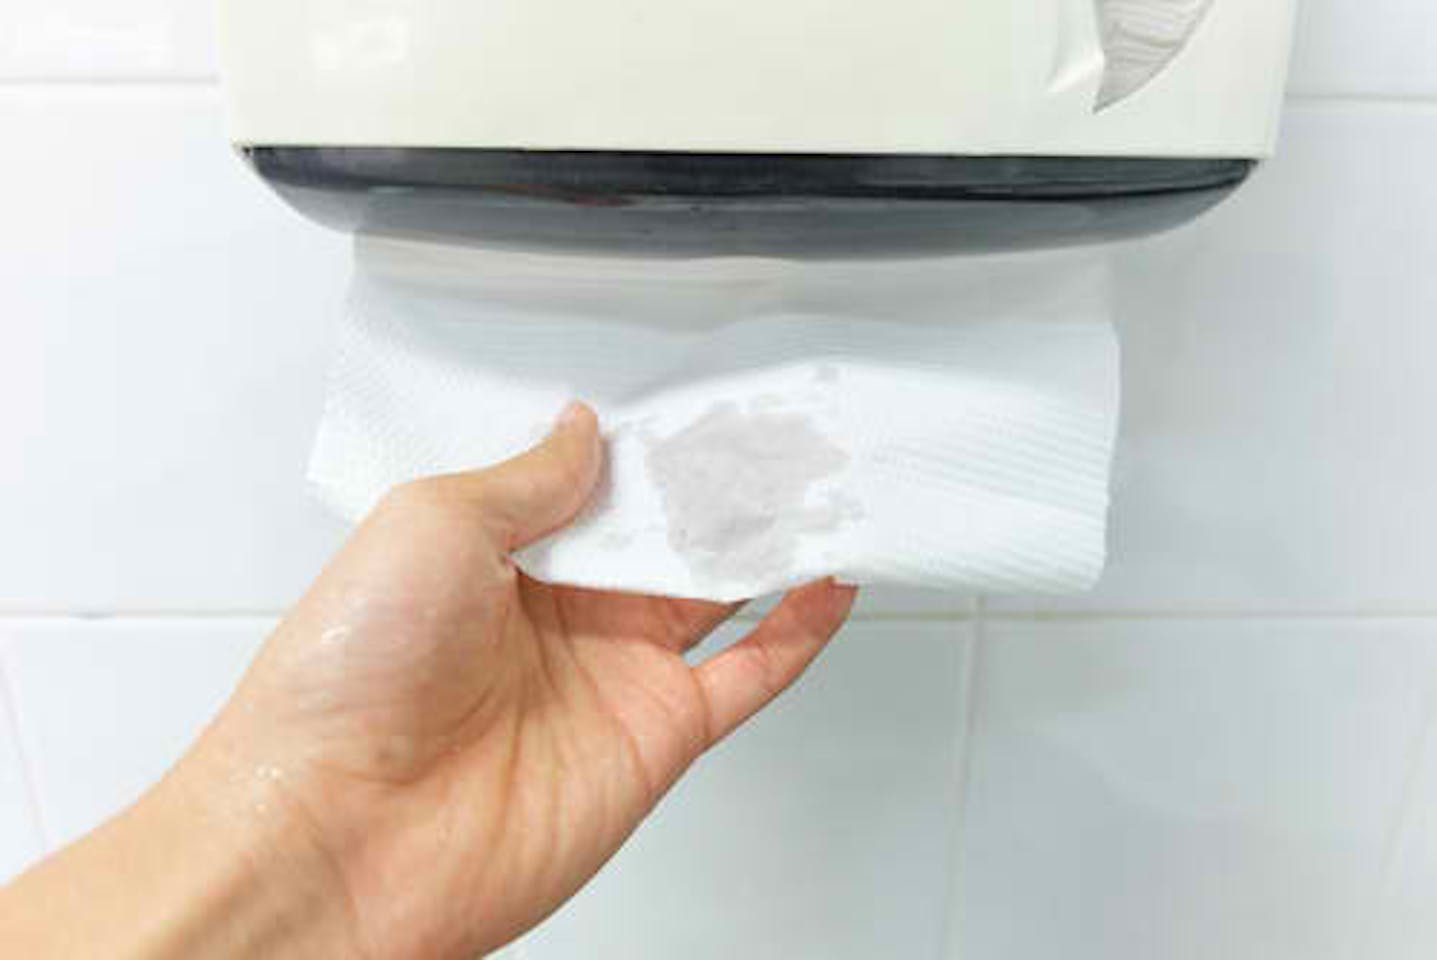 Why Paper Towels Are Better for Hand Drying